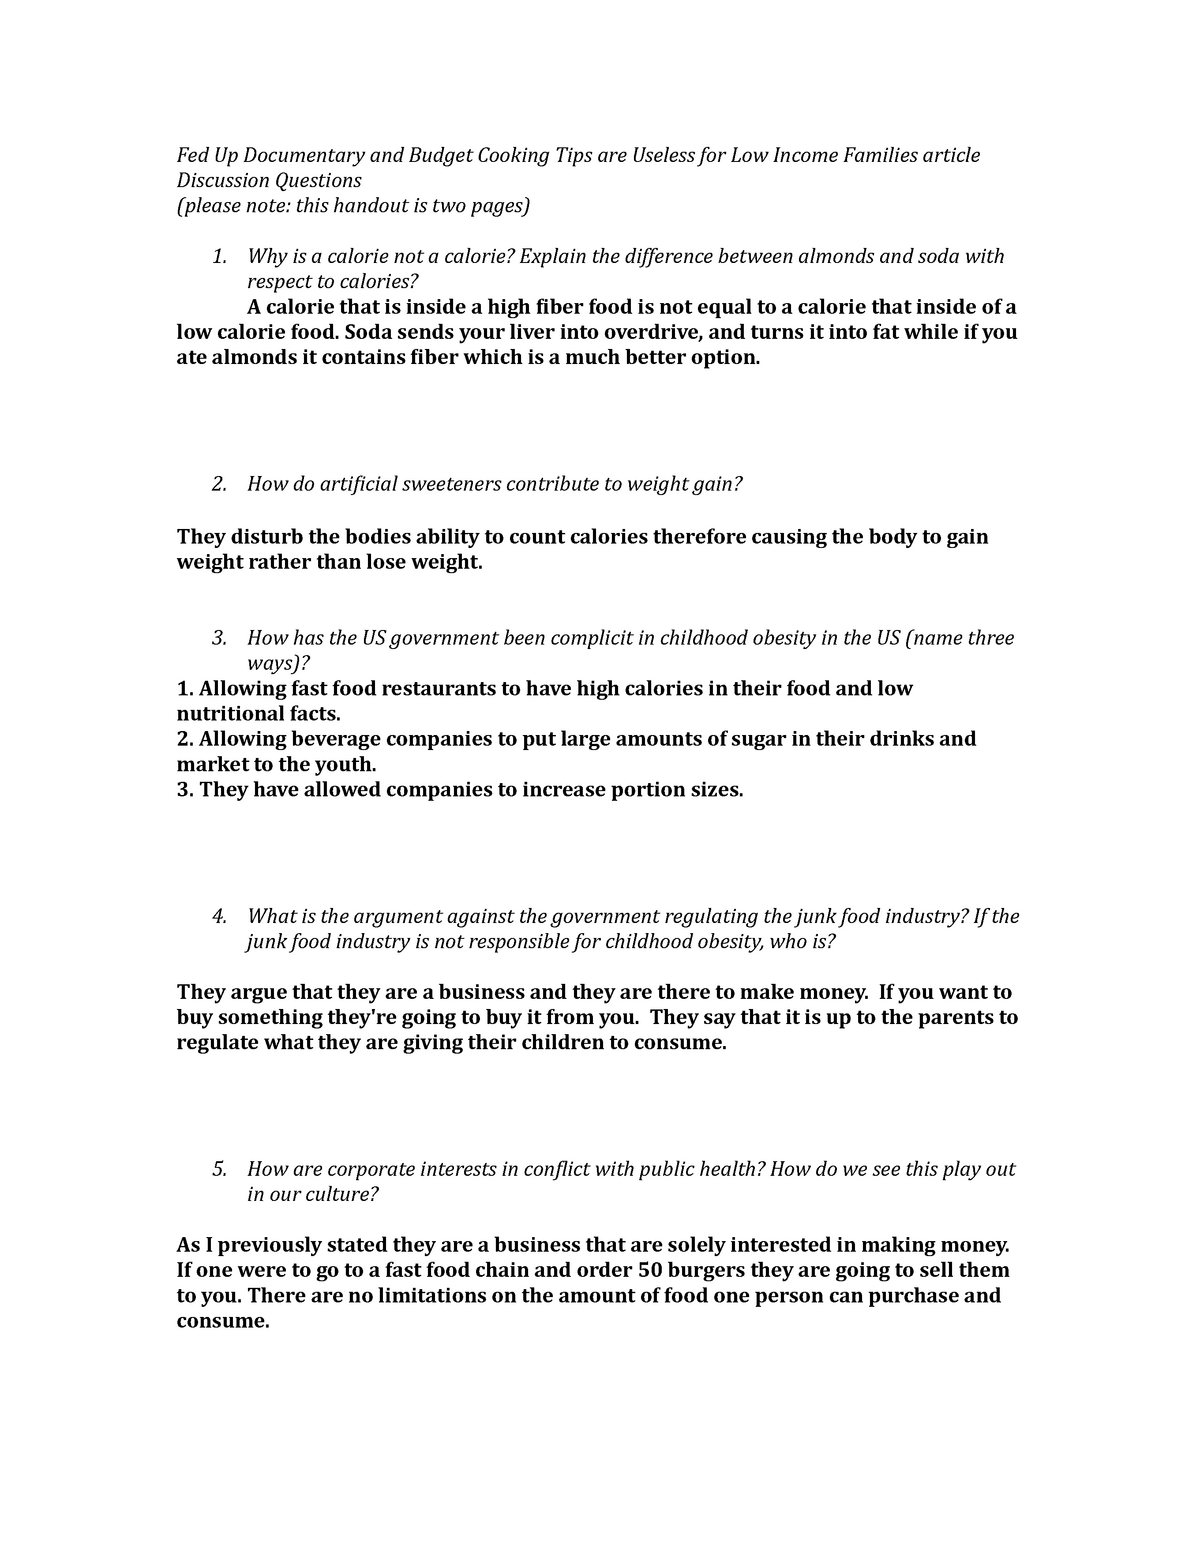 Fed Up and Budget Cooking Article Discussion Questions - HSC 21 Regarding Fed Up Worksheet Answer Key